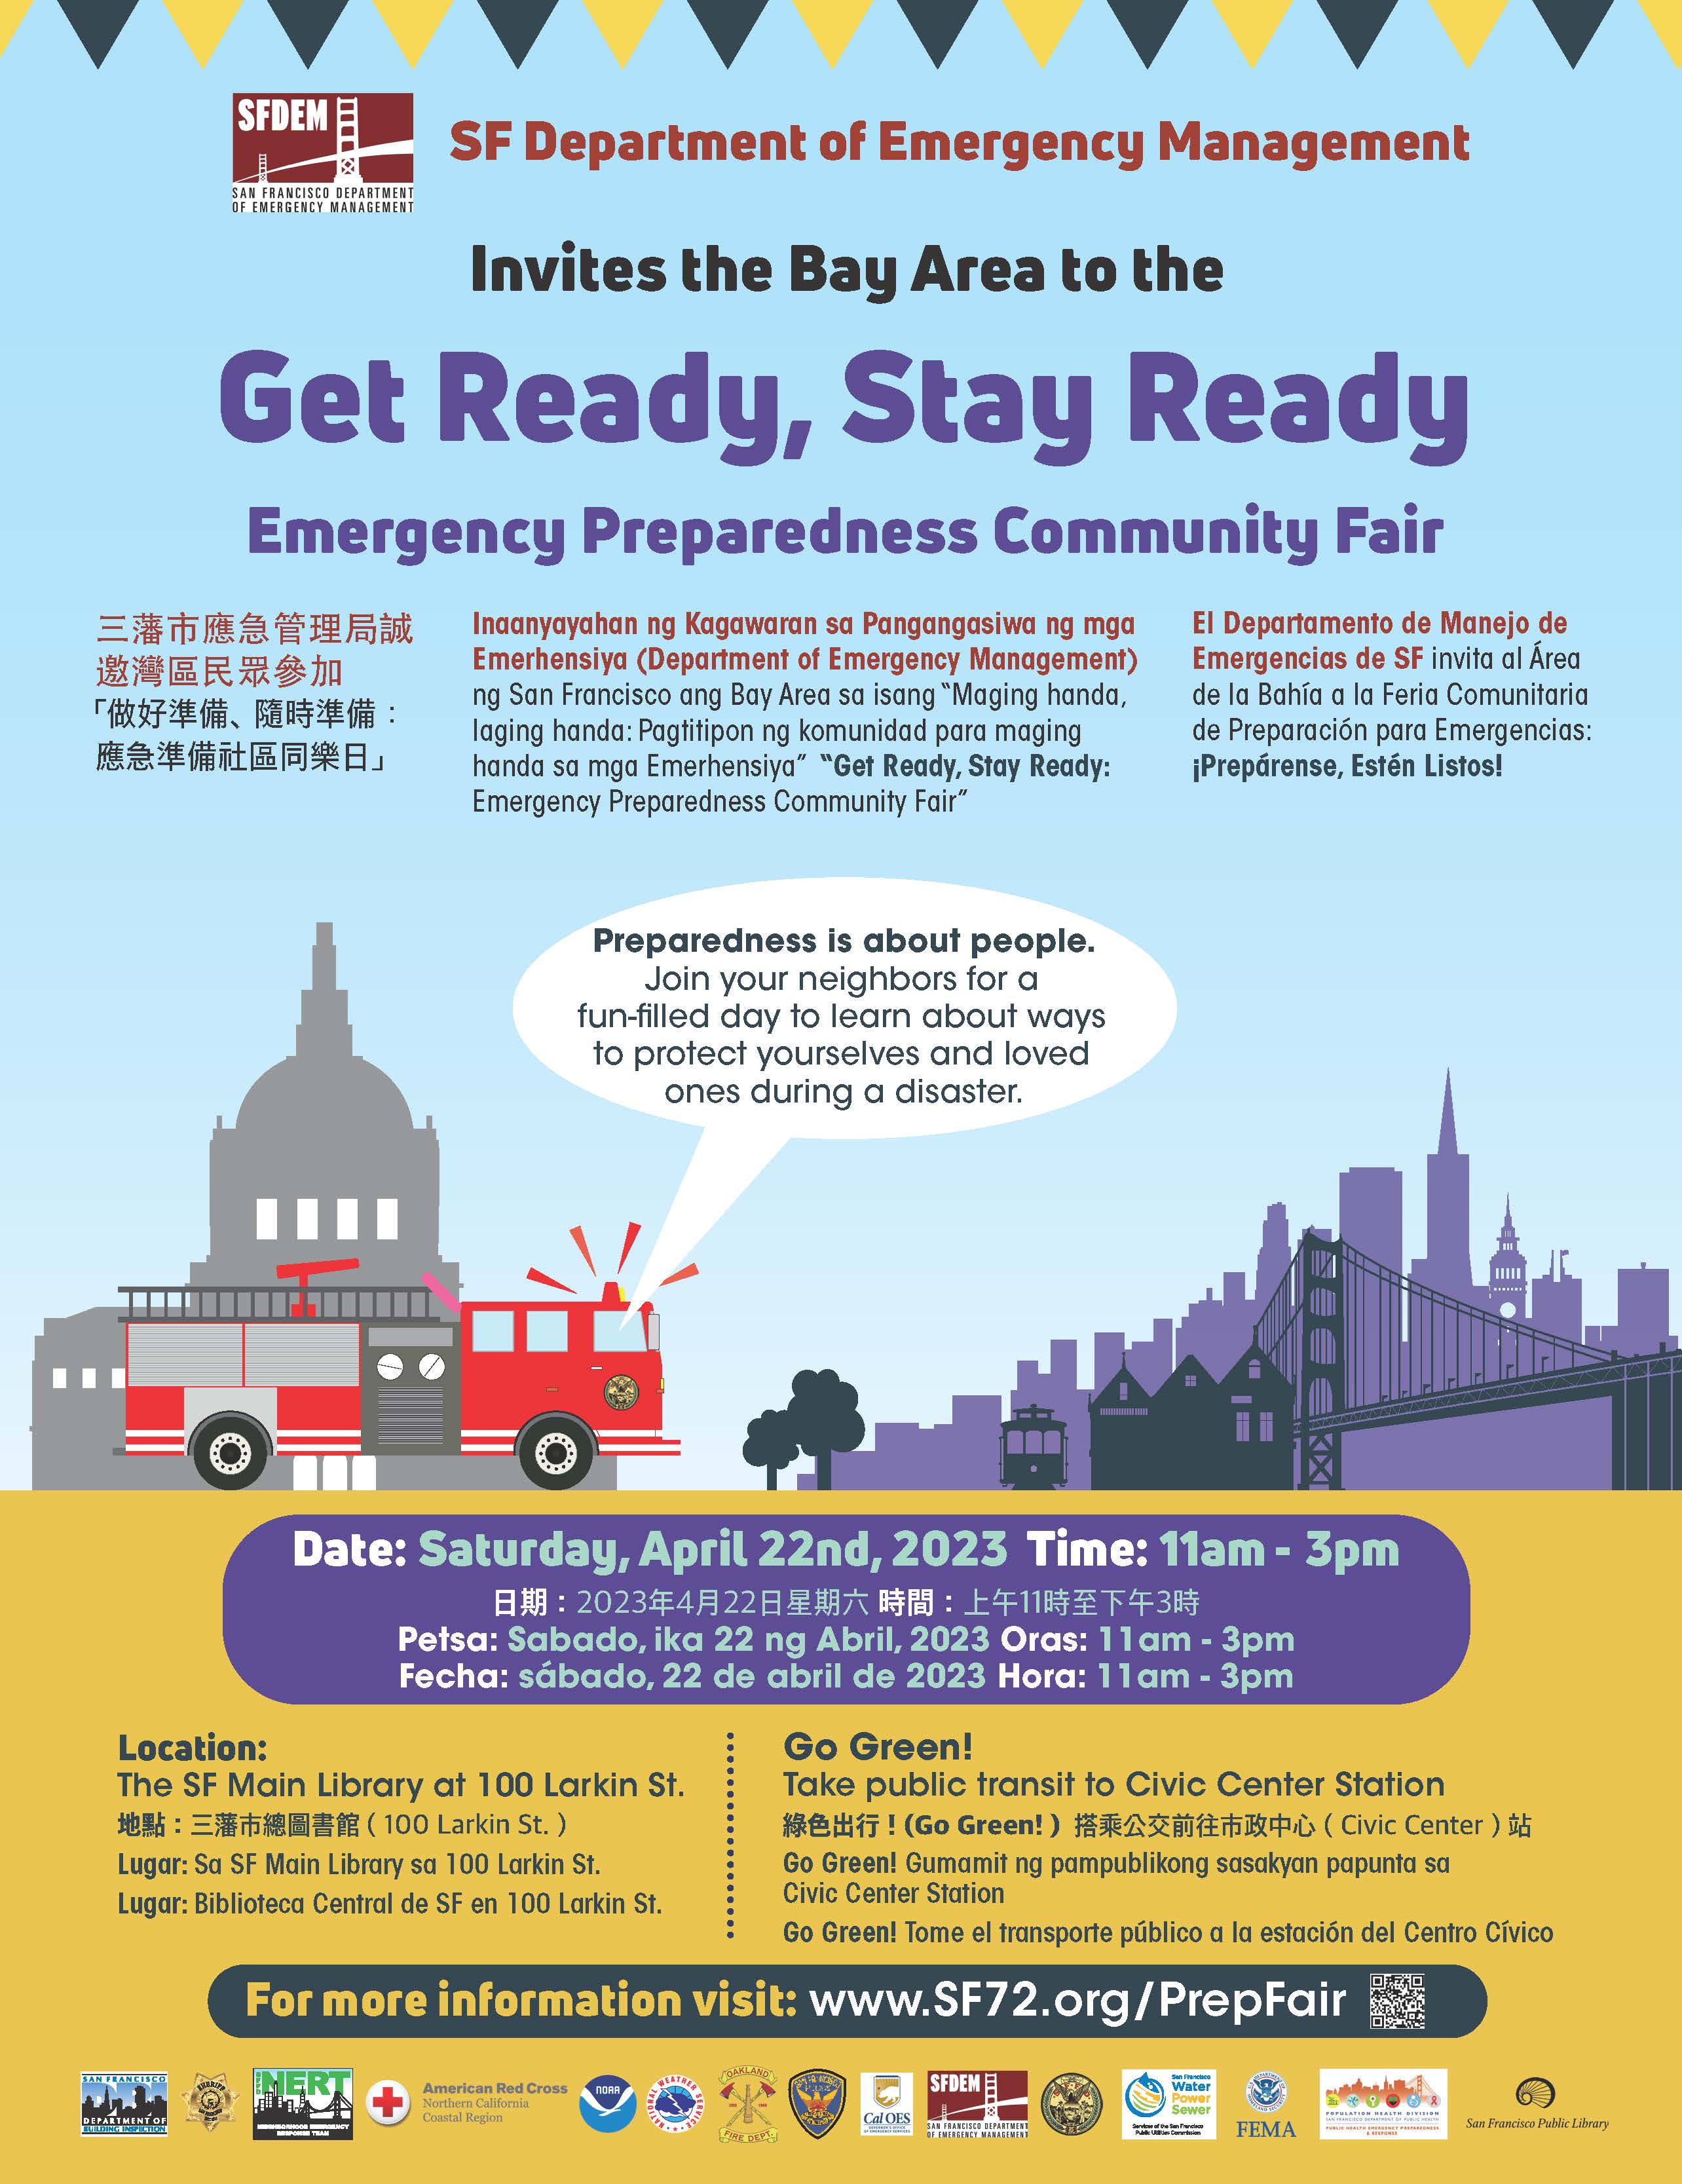 SF Department of Emergency Management invites the Bay Area to the "Get Ready, Stay Ready: Emergency Preparedness Community Fair"  Date: Saturday, April 22nd, 2023 Time: 11am - 3pm  Location: The SF Main Library at 100 Larkin St Go Green! Take public transit to Civic Center Station